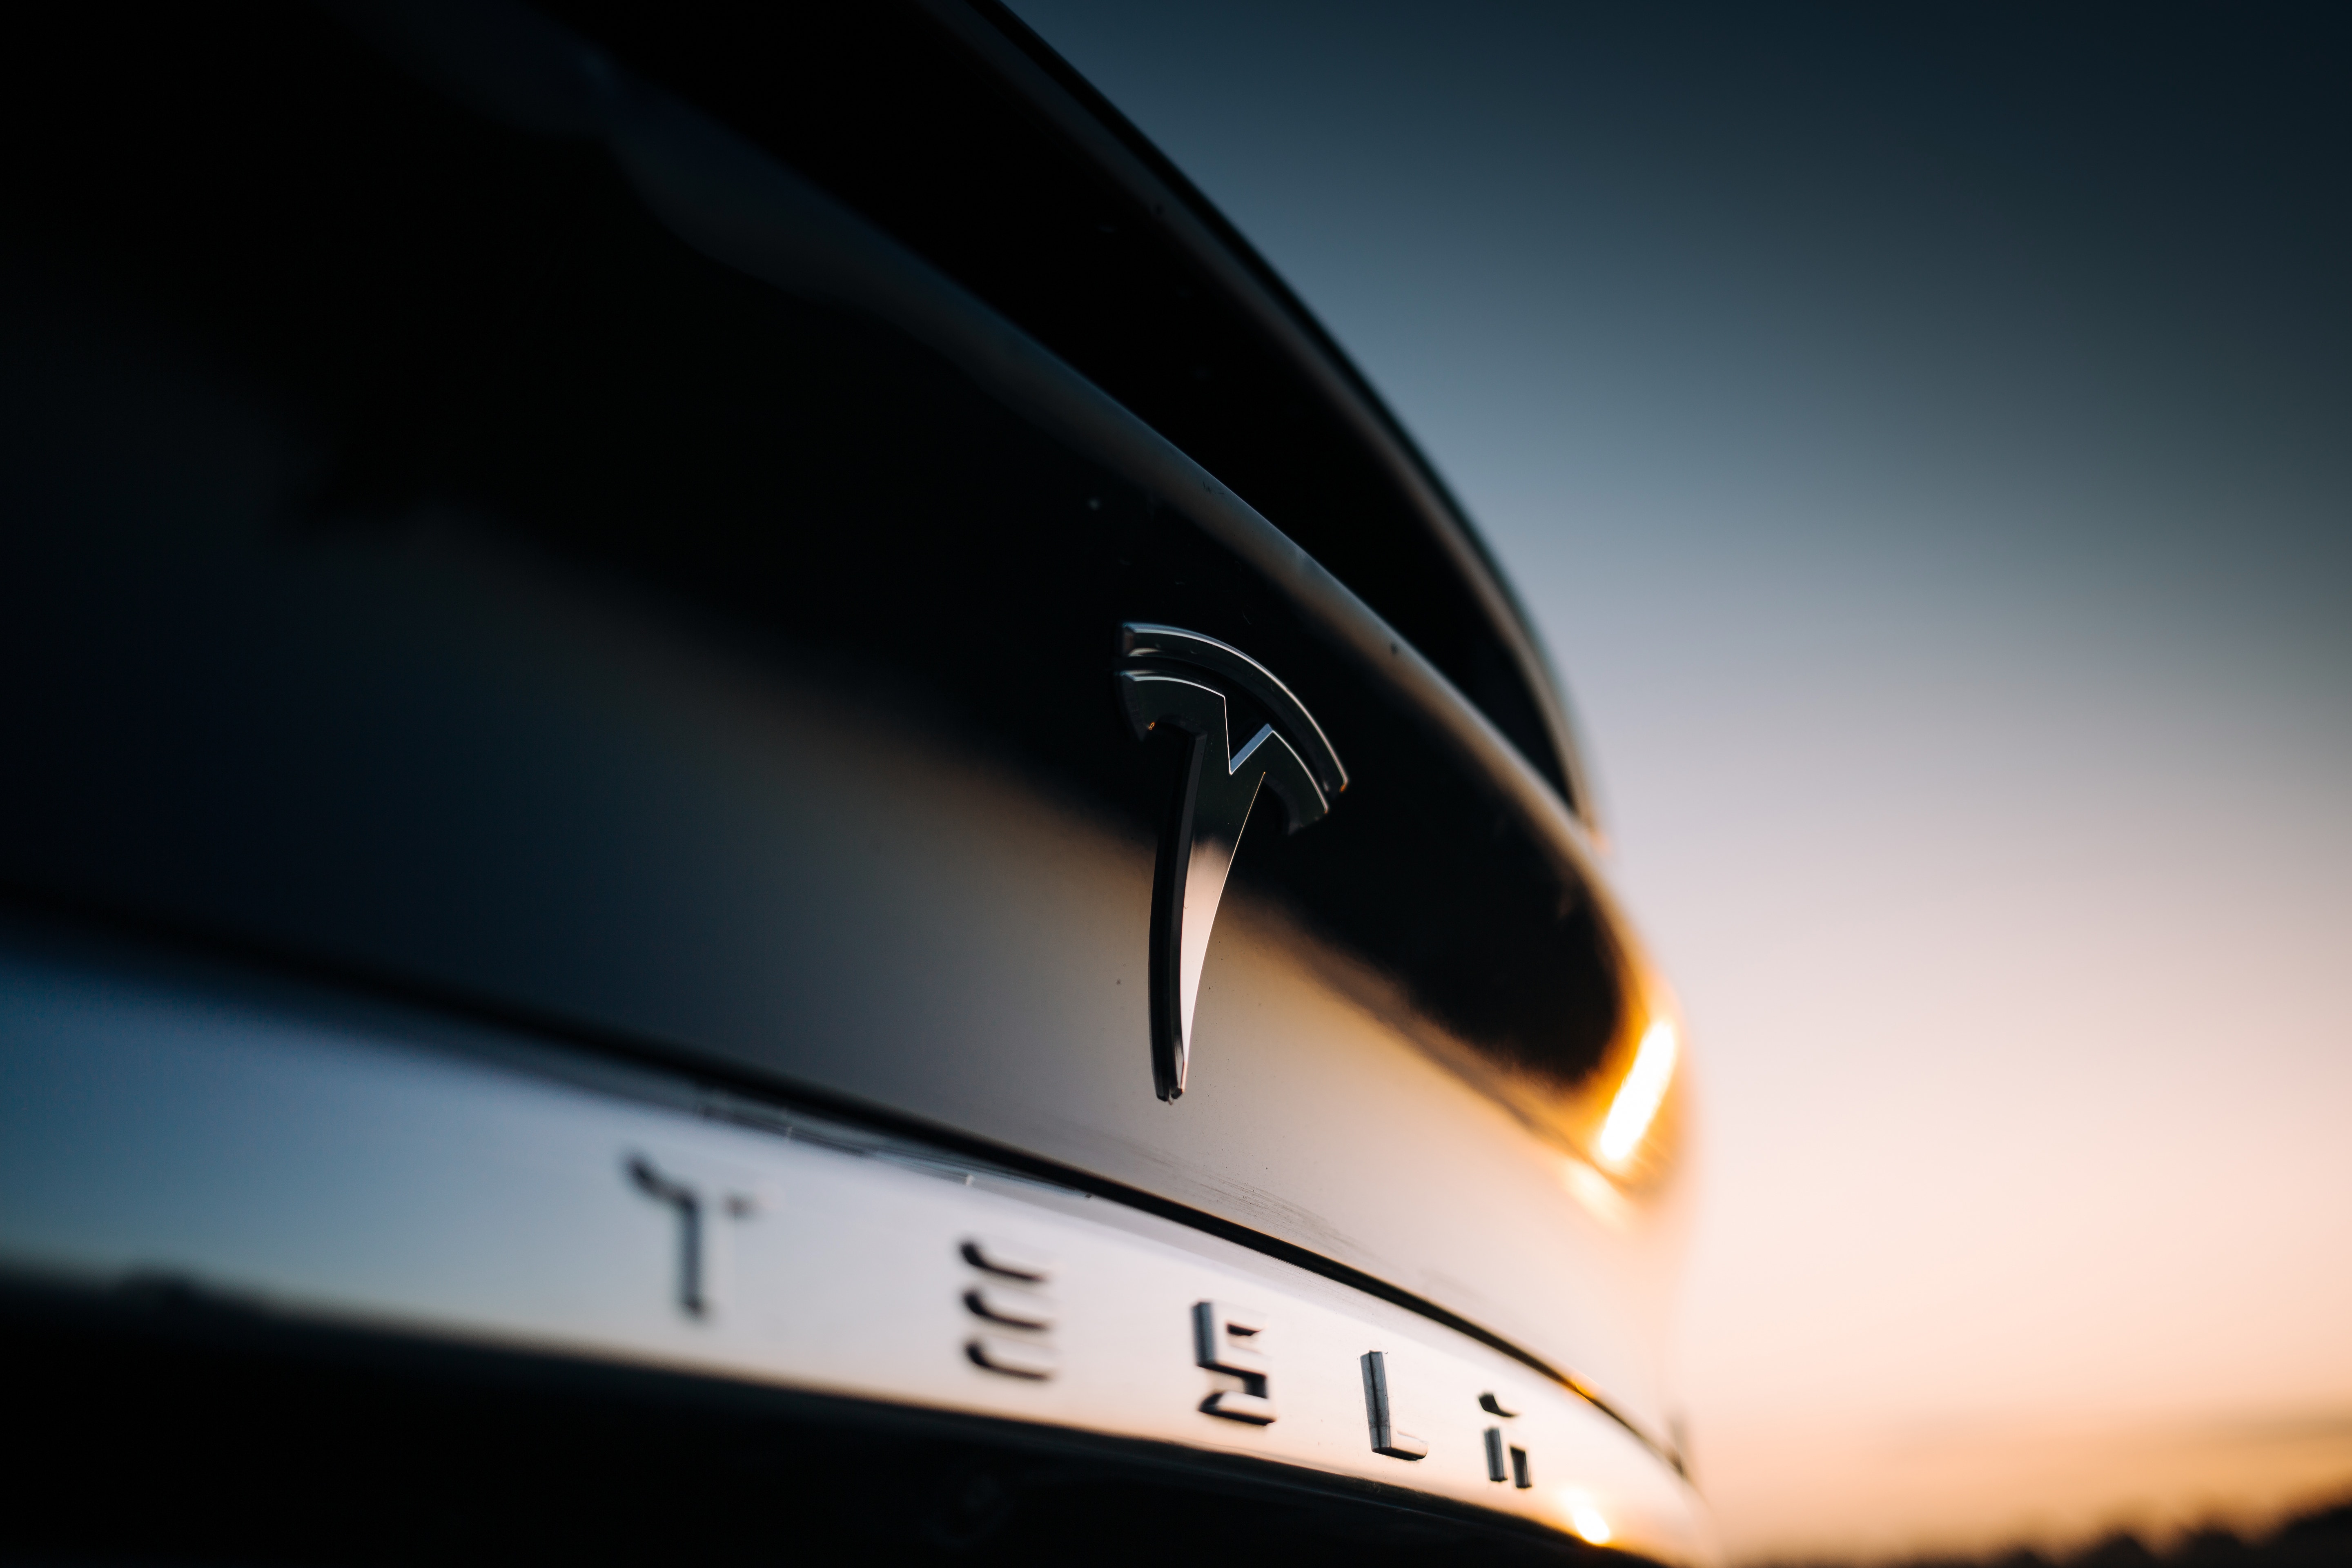 Will Tesla AI Chief Andrej Karpathy's Departure Impact The Company? Analysts, Investors Weigh In